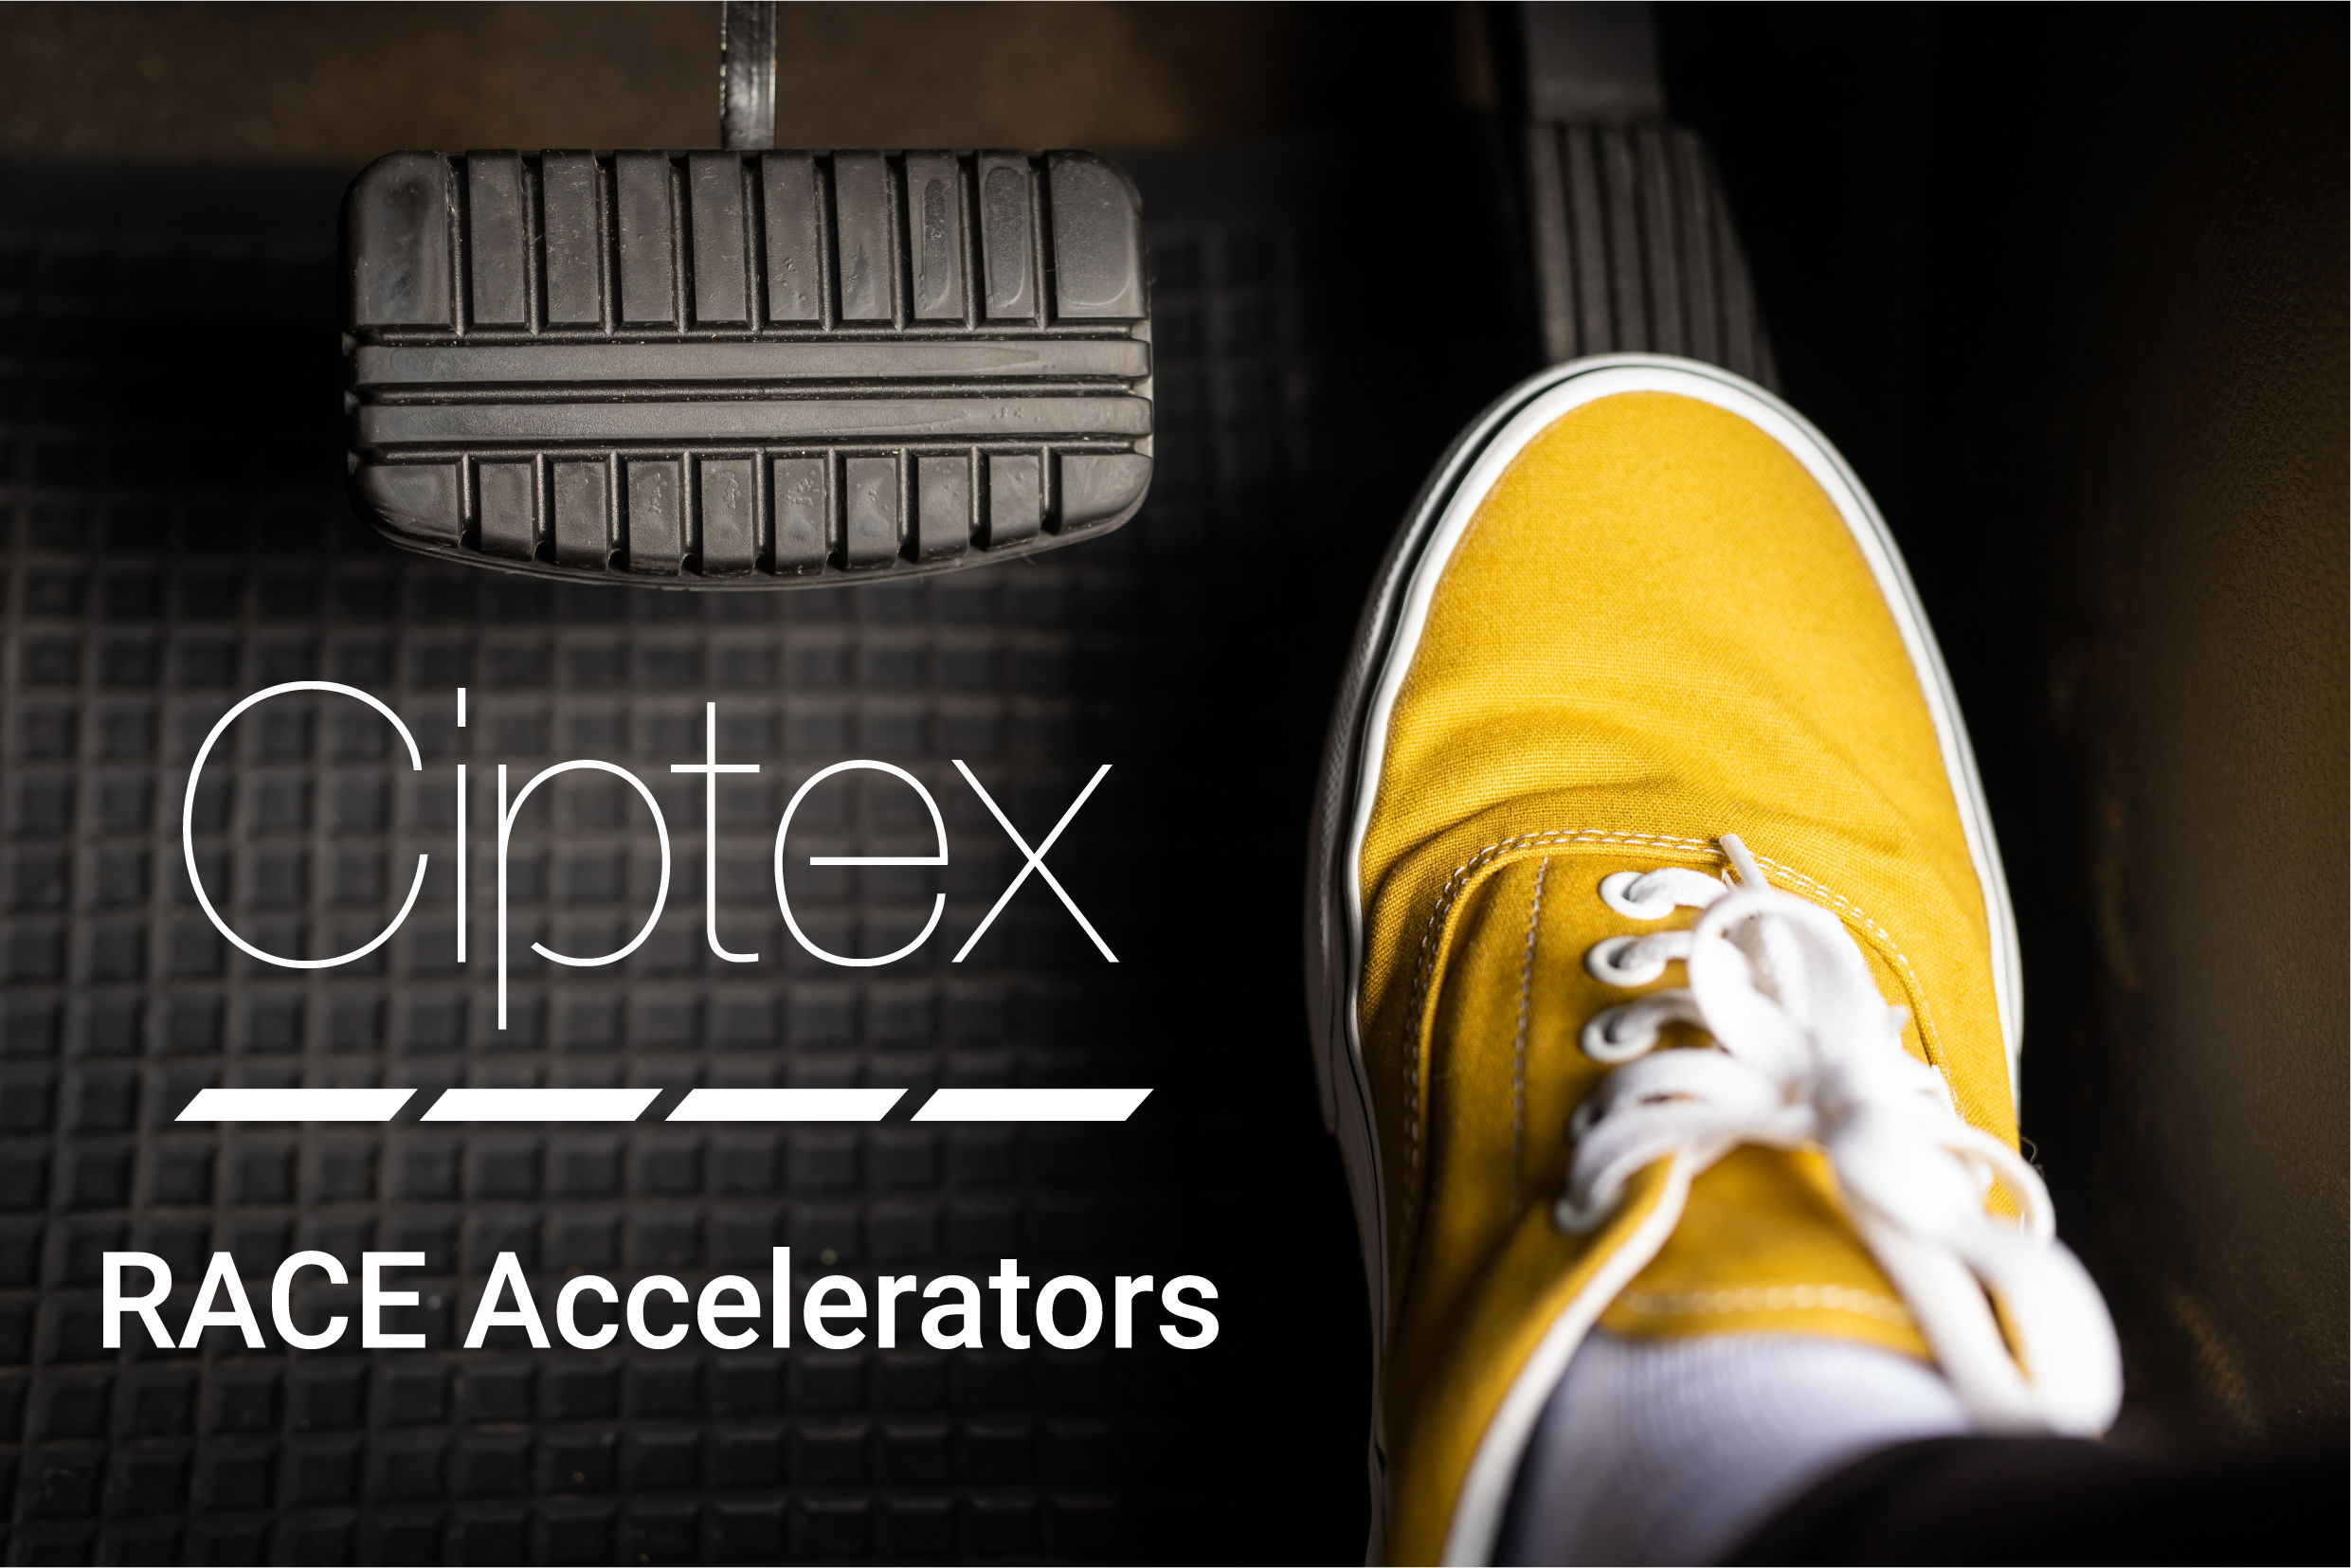 A yellow trainer pressing the accelerator of a car with the title Ciptex RACE Accelerators overlay